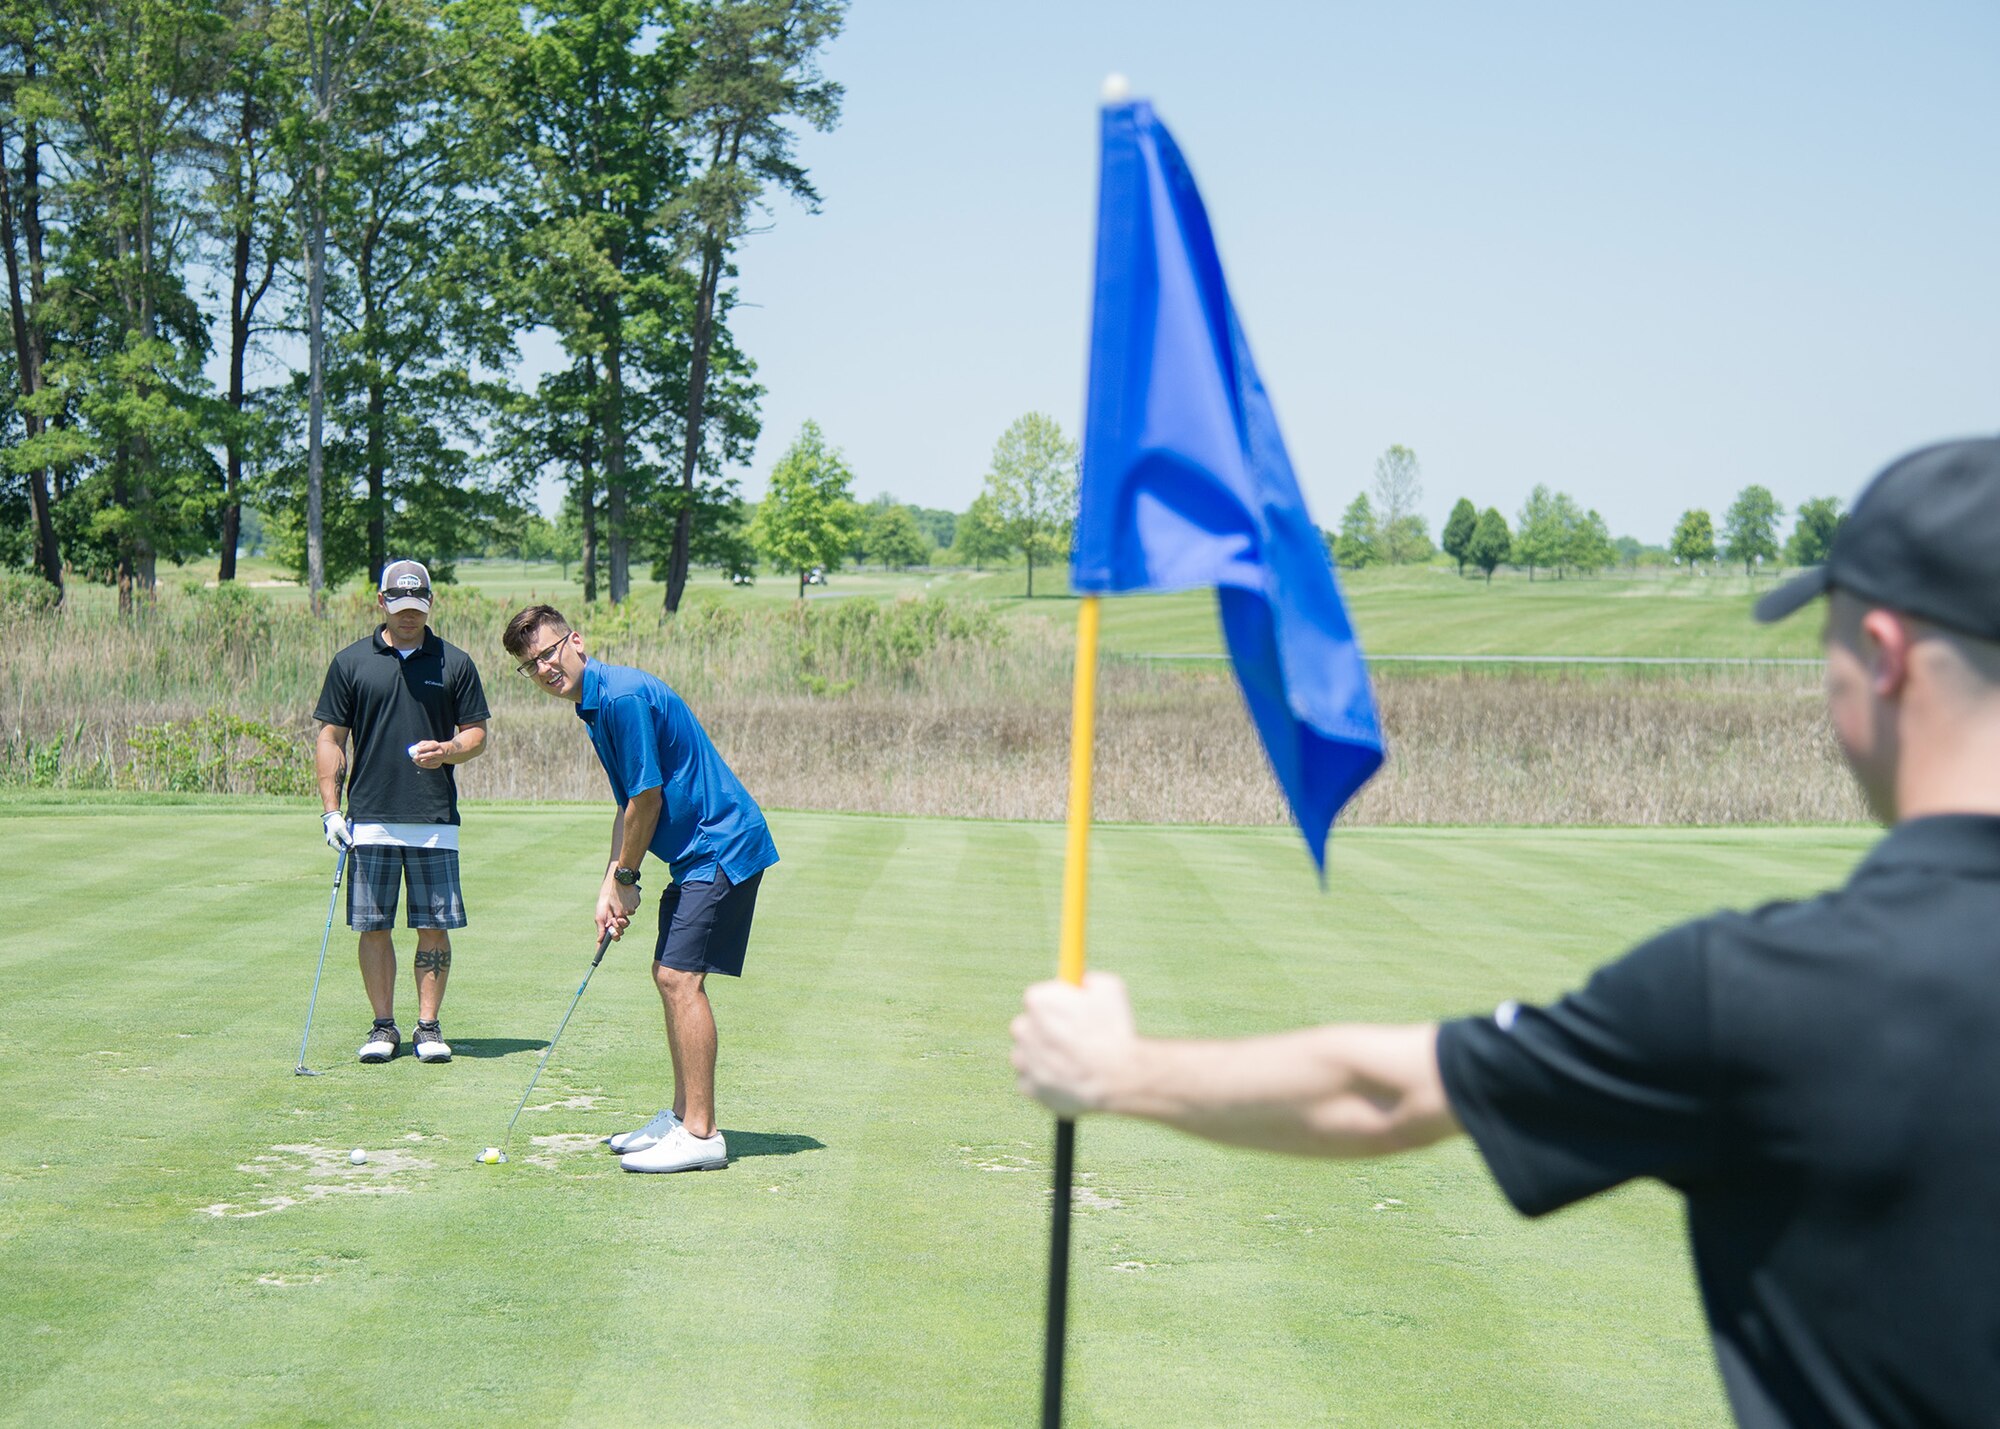 Senior Airman Bryon Grimco Jr., 736th Aircraft Maintenance Squadron C-17 crewchief, prepares to putt at the 2017 spring Bluesuiters Golf Tournament May 17, 2017, 2016, at the Jonathan’s Landing Golf Course in Magnolia, Delaware. The biannual tournament also features raffles, door prizes and dinner at the clubhouse. (U.S. Air Force photo by Mauricio Campino)